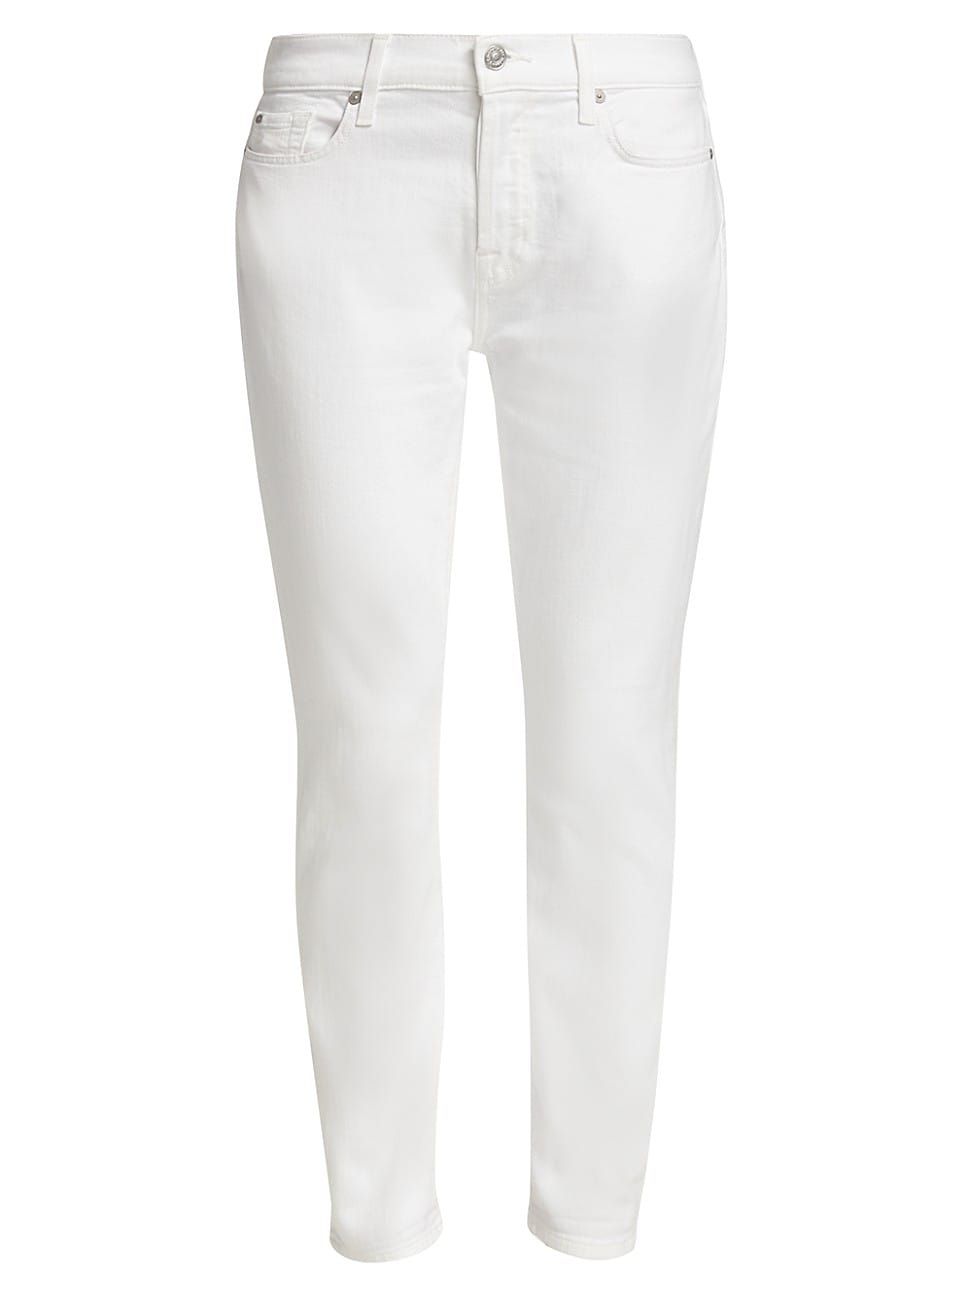 7 For All Mankind Luxe Vintage Josefina White Jeans | Saks Fifth Avenue